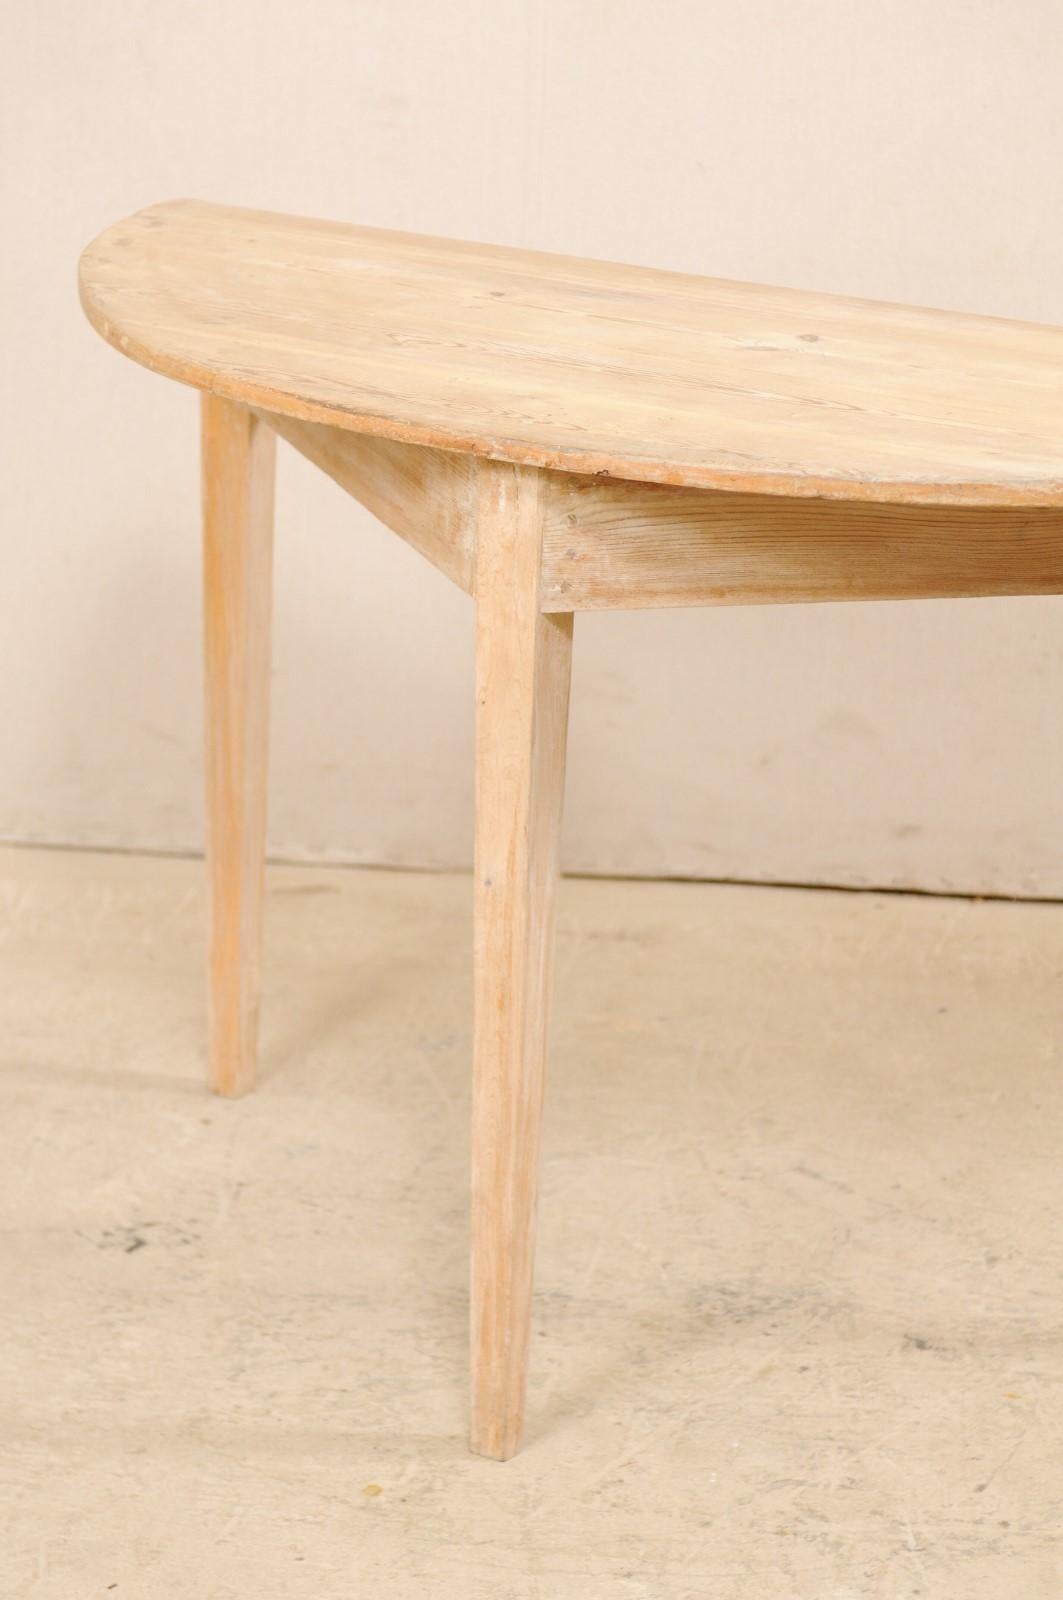 Swedish Demilune Natural Wood Table W/ Old Paint Remnants from 19th Century  5